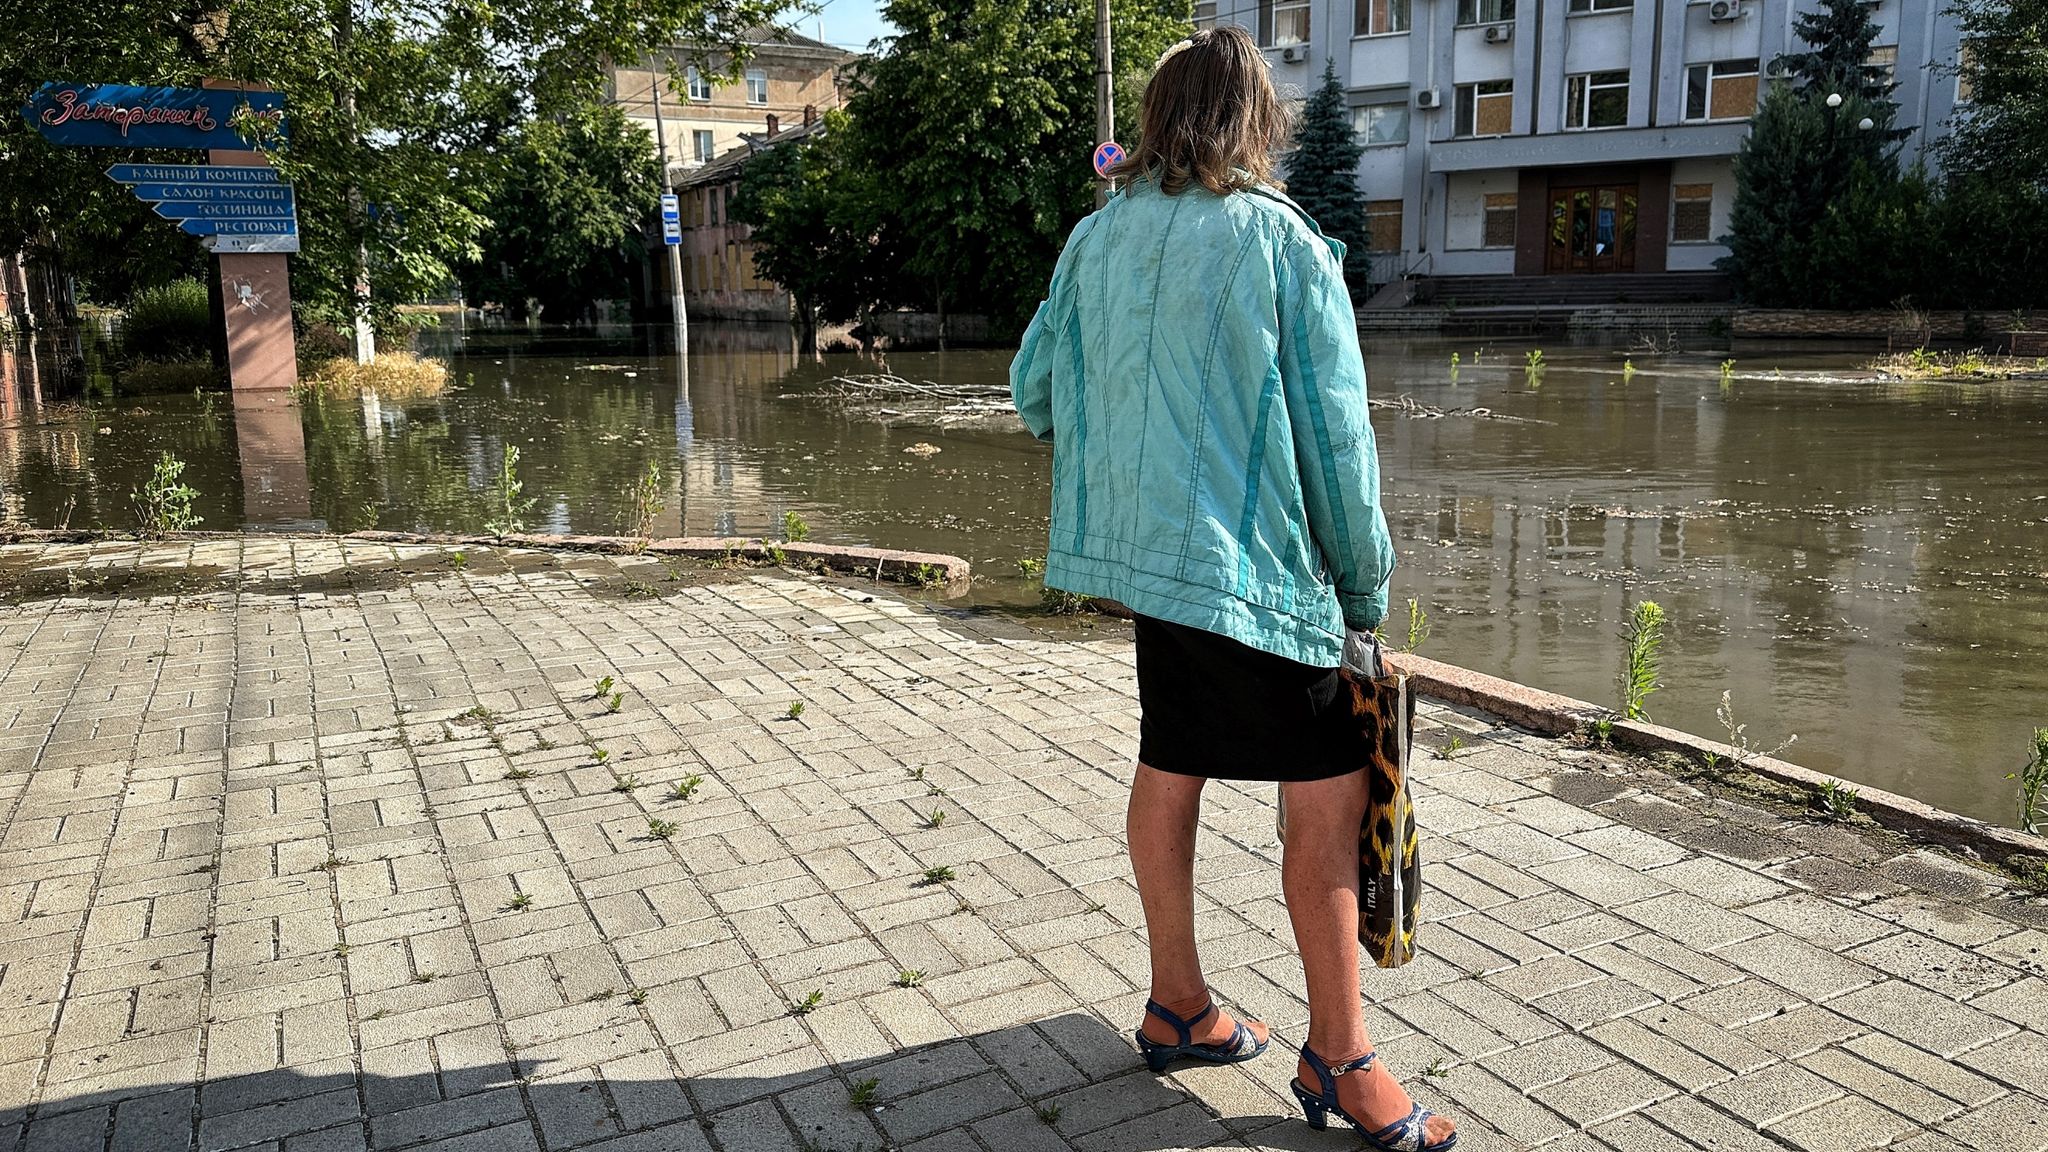 Ukraine war: Whole villages and towns engulfed by torrent of water ...